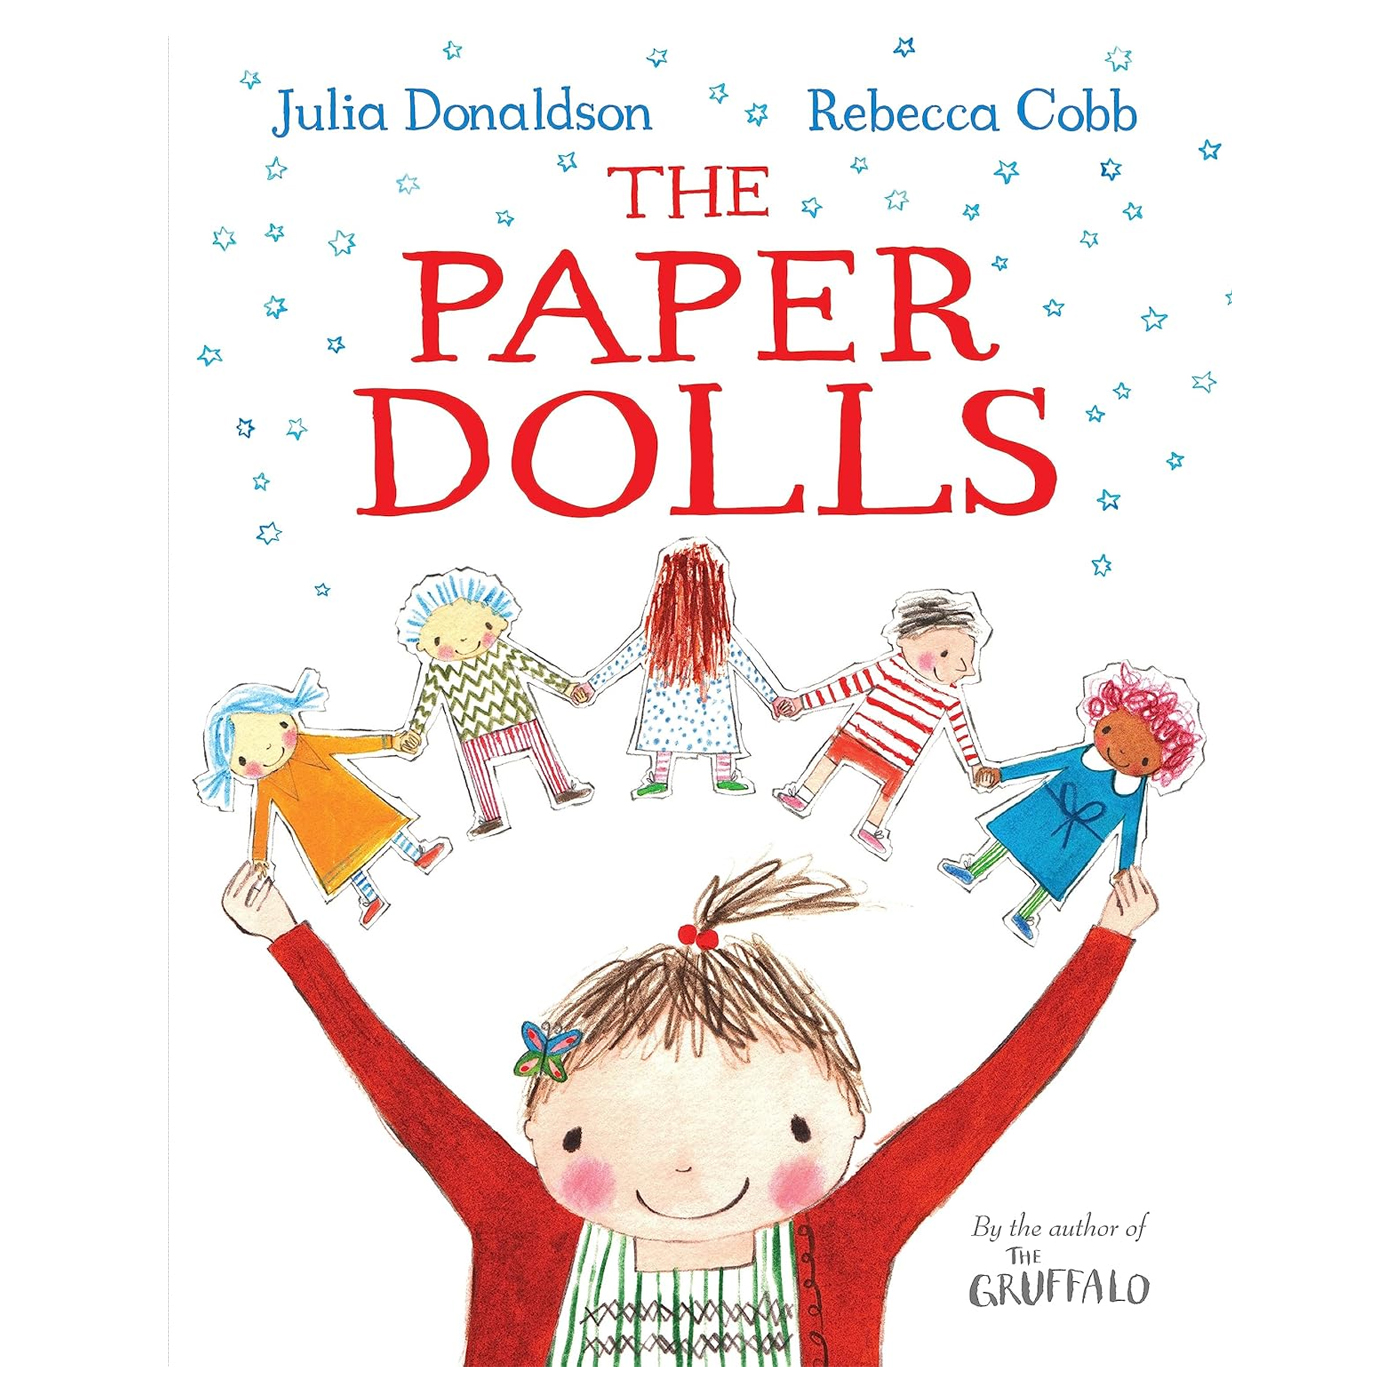  The Paper Dolls